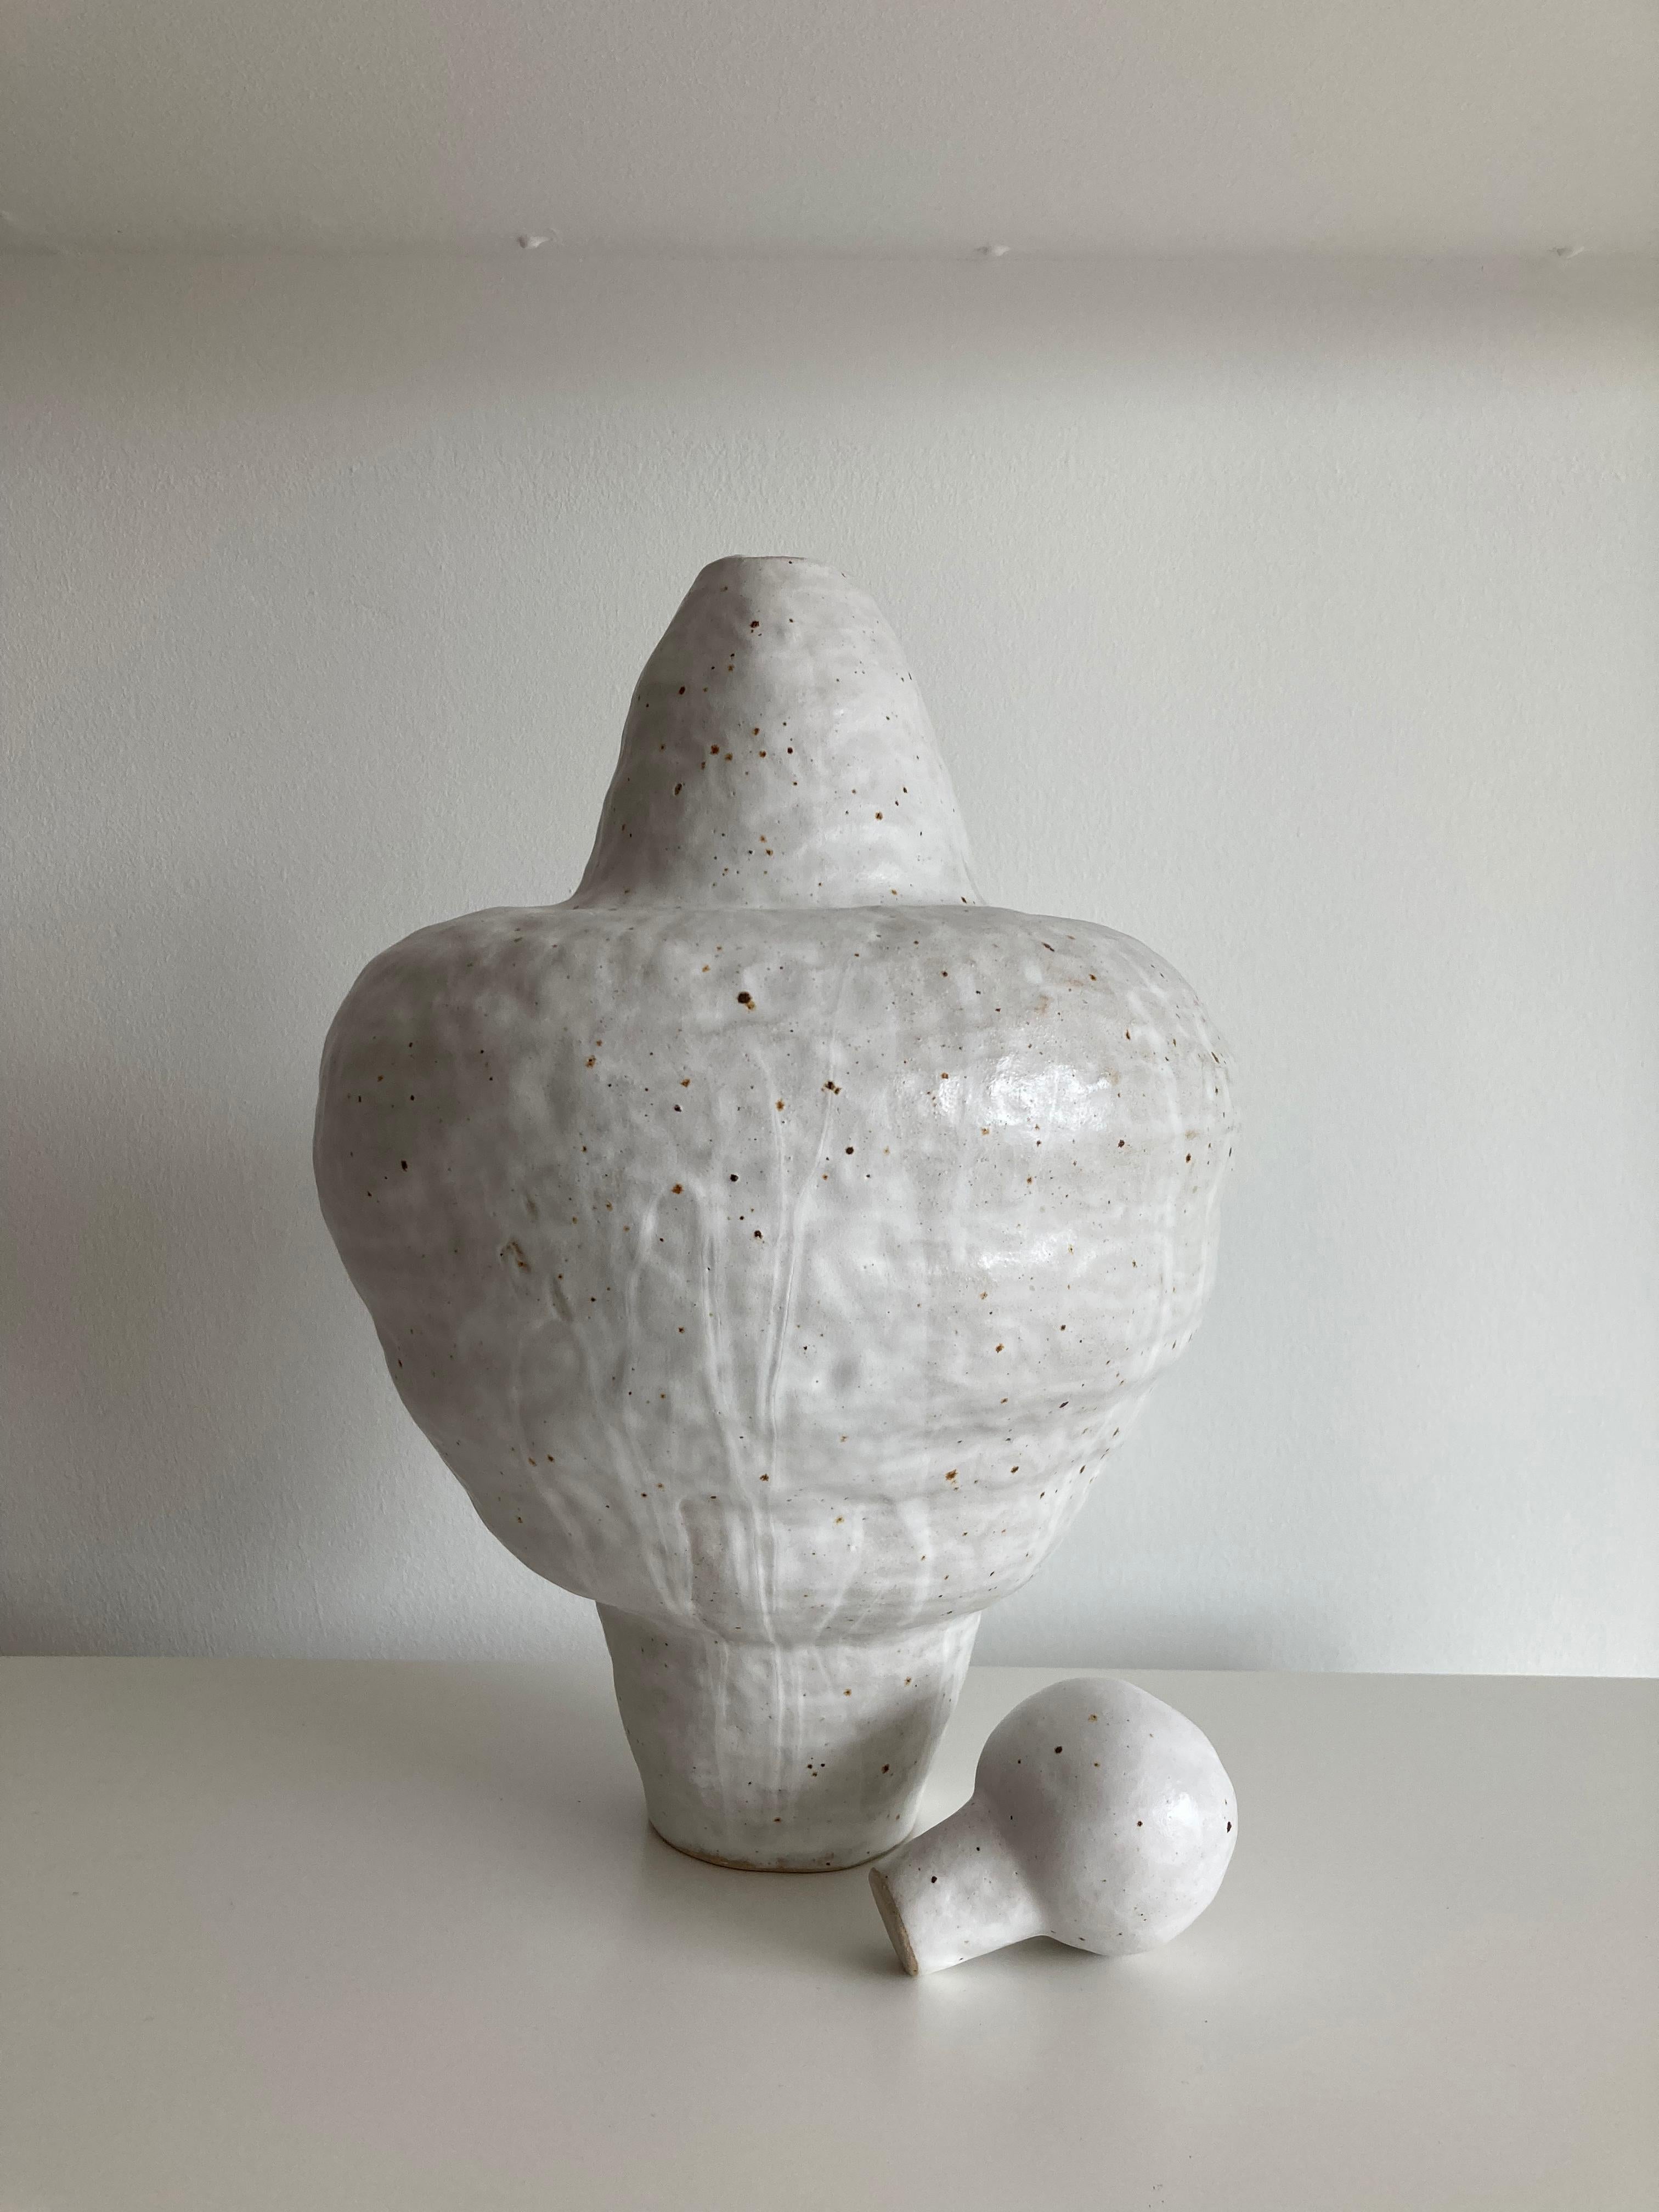 No.84 stoneware sculpture, Tonfisk by Ciona Lee 
One of a Kind
Dimensions: Ø 24 x H 34 cm
Materials: Speckled stoneware, Matte White Glaze
Variations of size and colour available

Tonfisk is the ceramic practice by Ciona Lee, a Korean-Italian